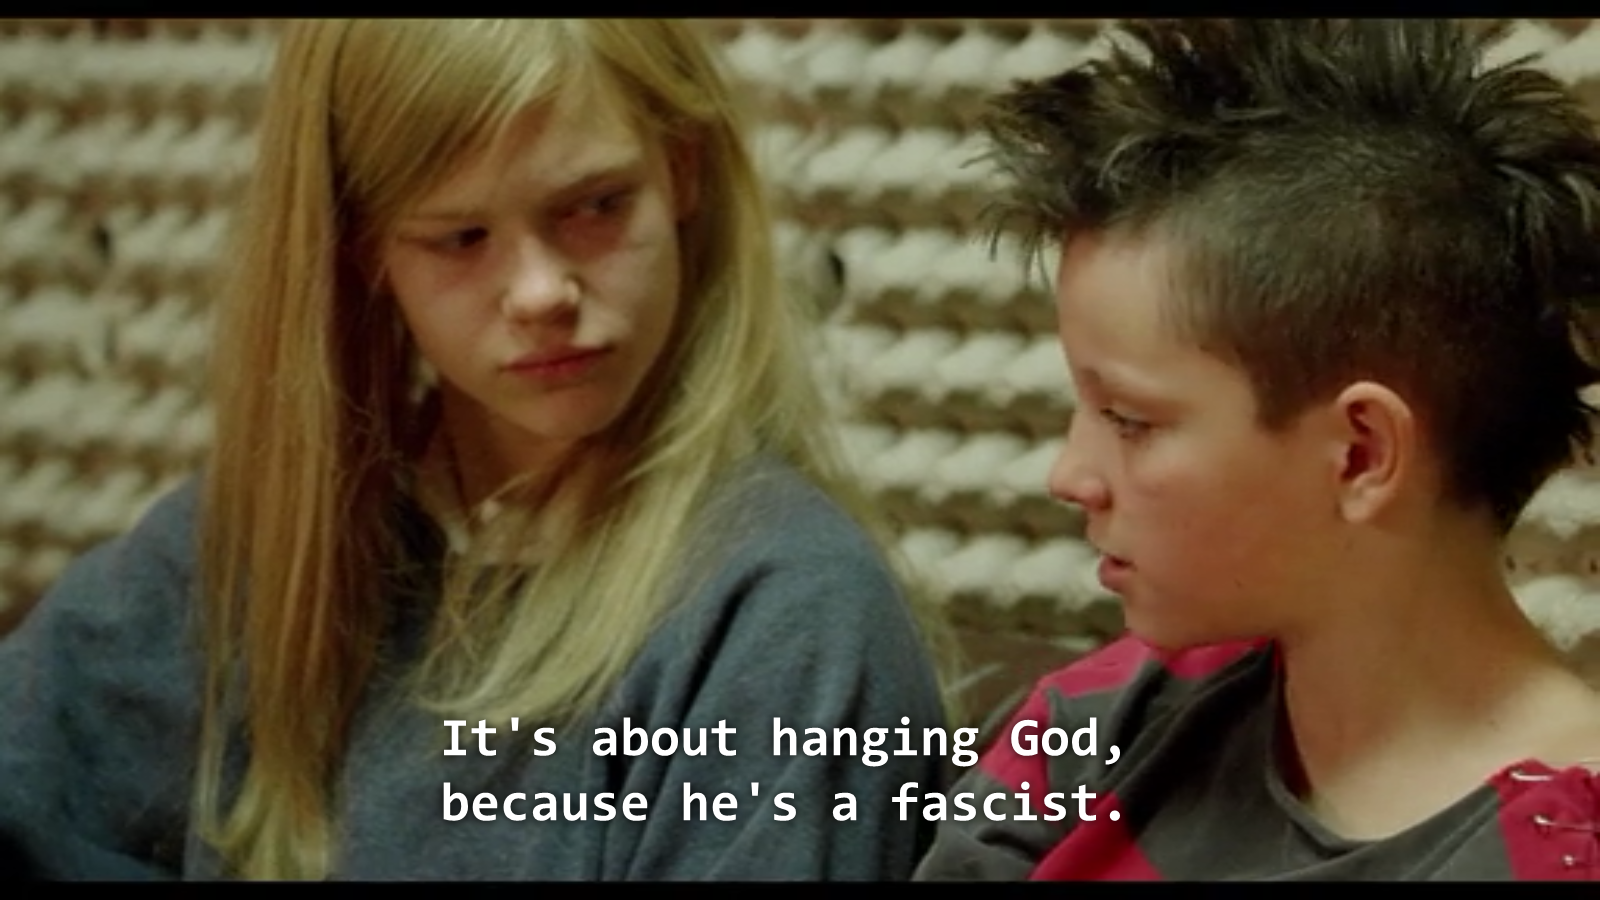 a teenage girl with long blonde hair looks skeptically at a girl with a mohawk who tells her "It's about hanging God, because he's a fascist"